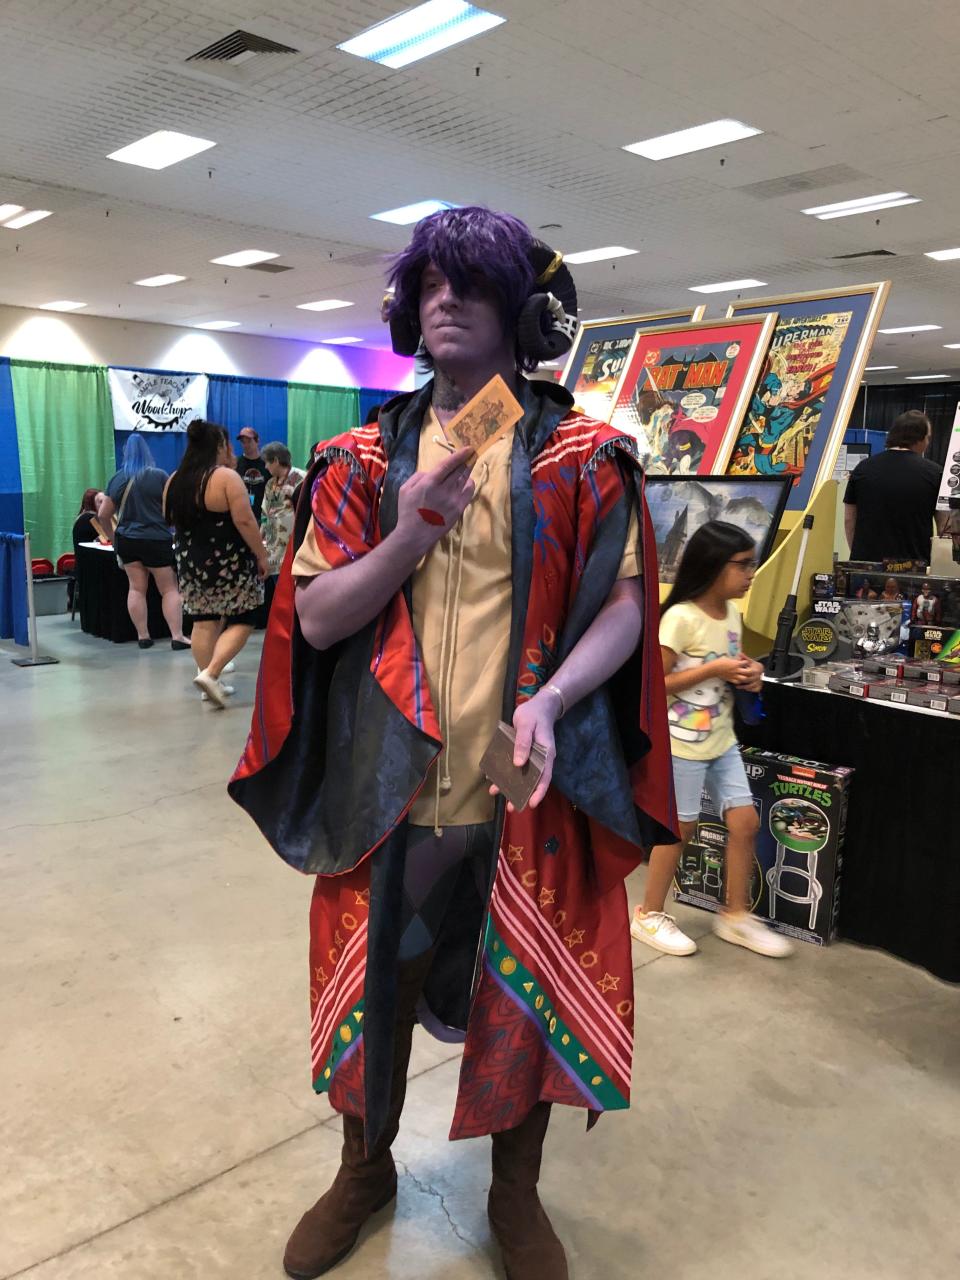 Cy Darrow is portraying a Mollymauk Tealeaf from Critical Role at AMA-CON in Amarillo. His purple tint was beginning to run, one of the hazards of makeup.